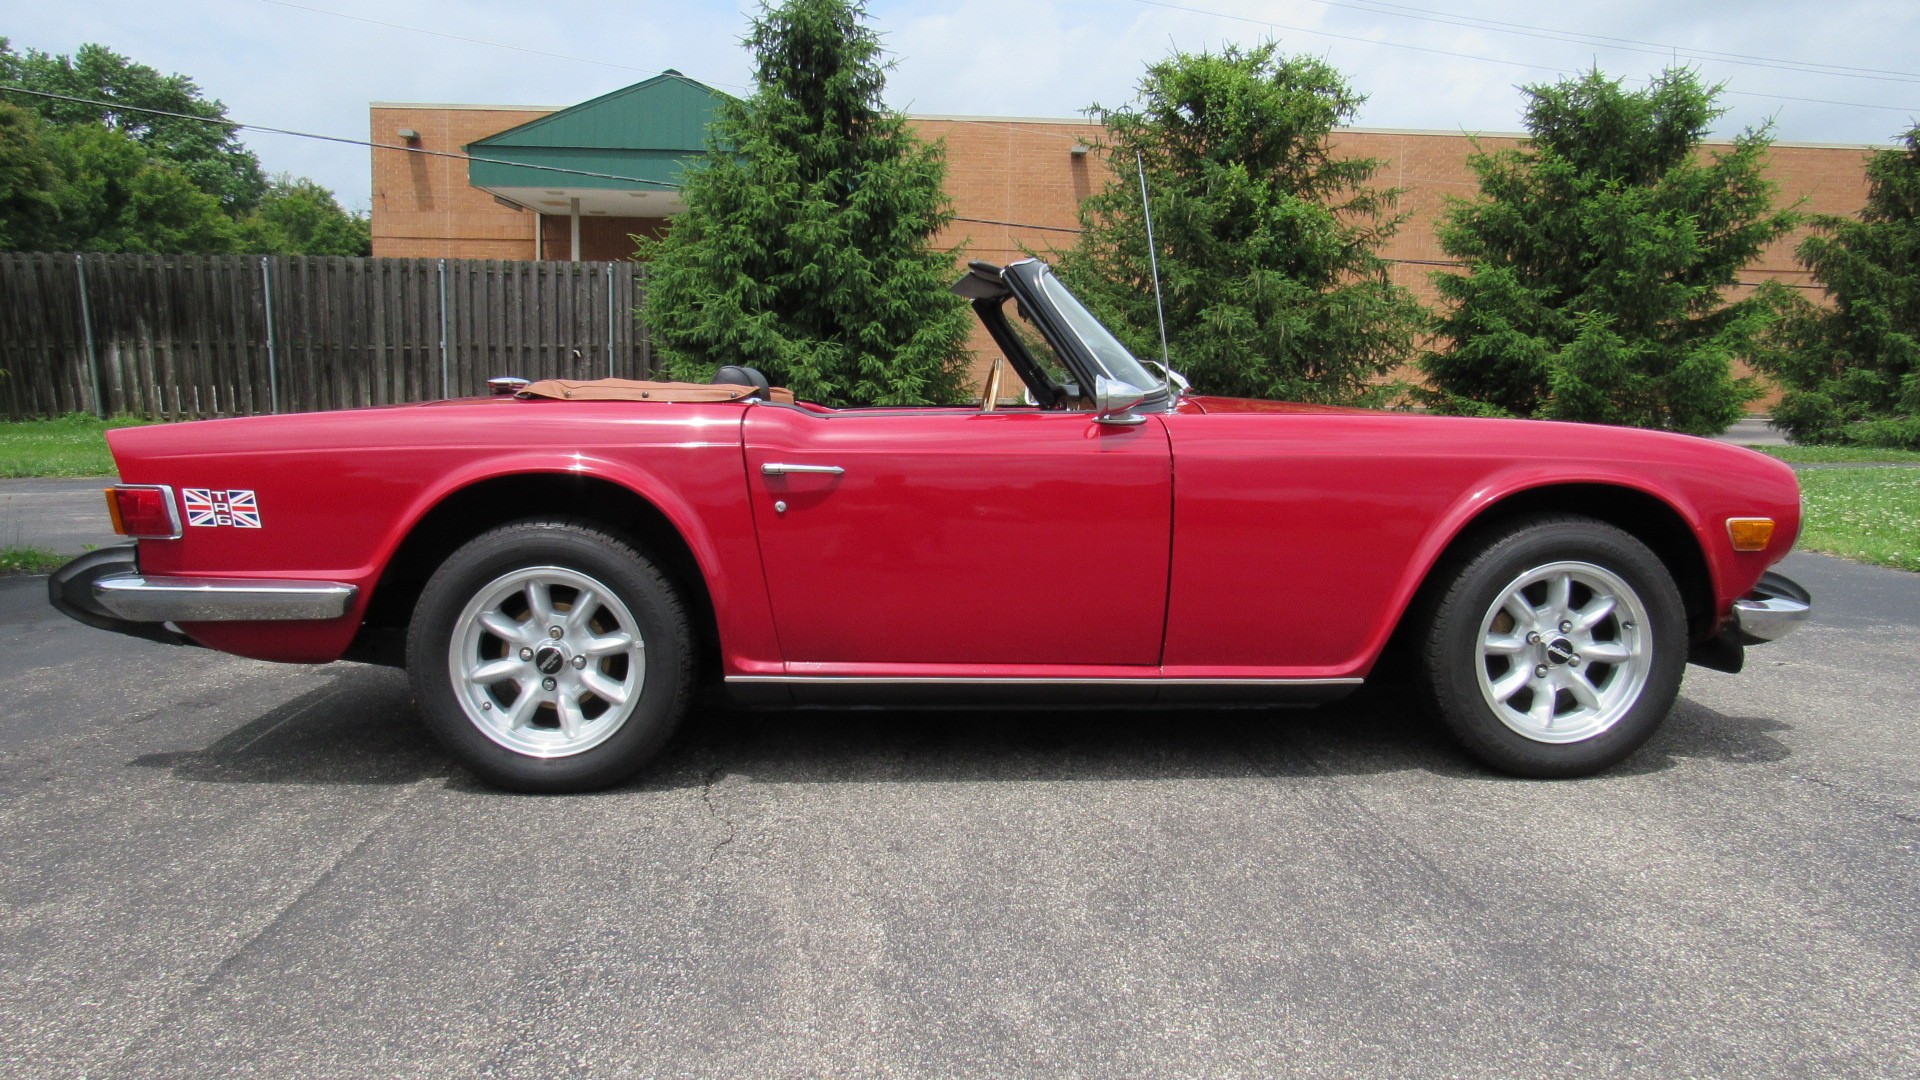 1973 TR6, Overdrive, Hardtop, SOLD!